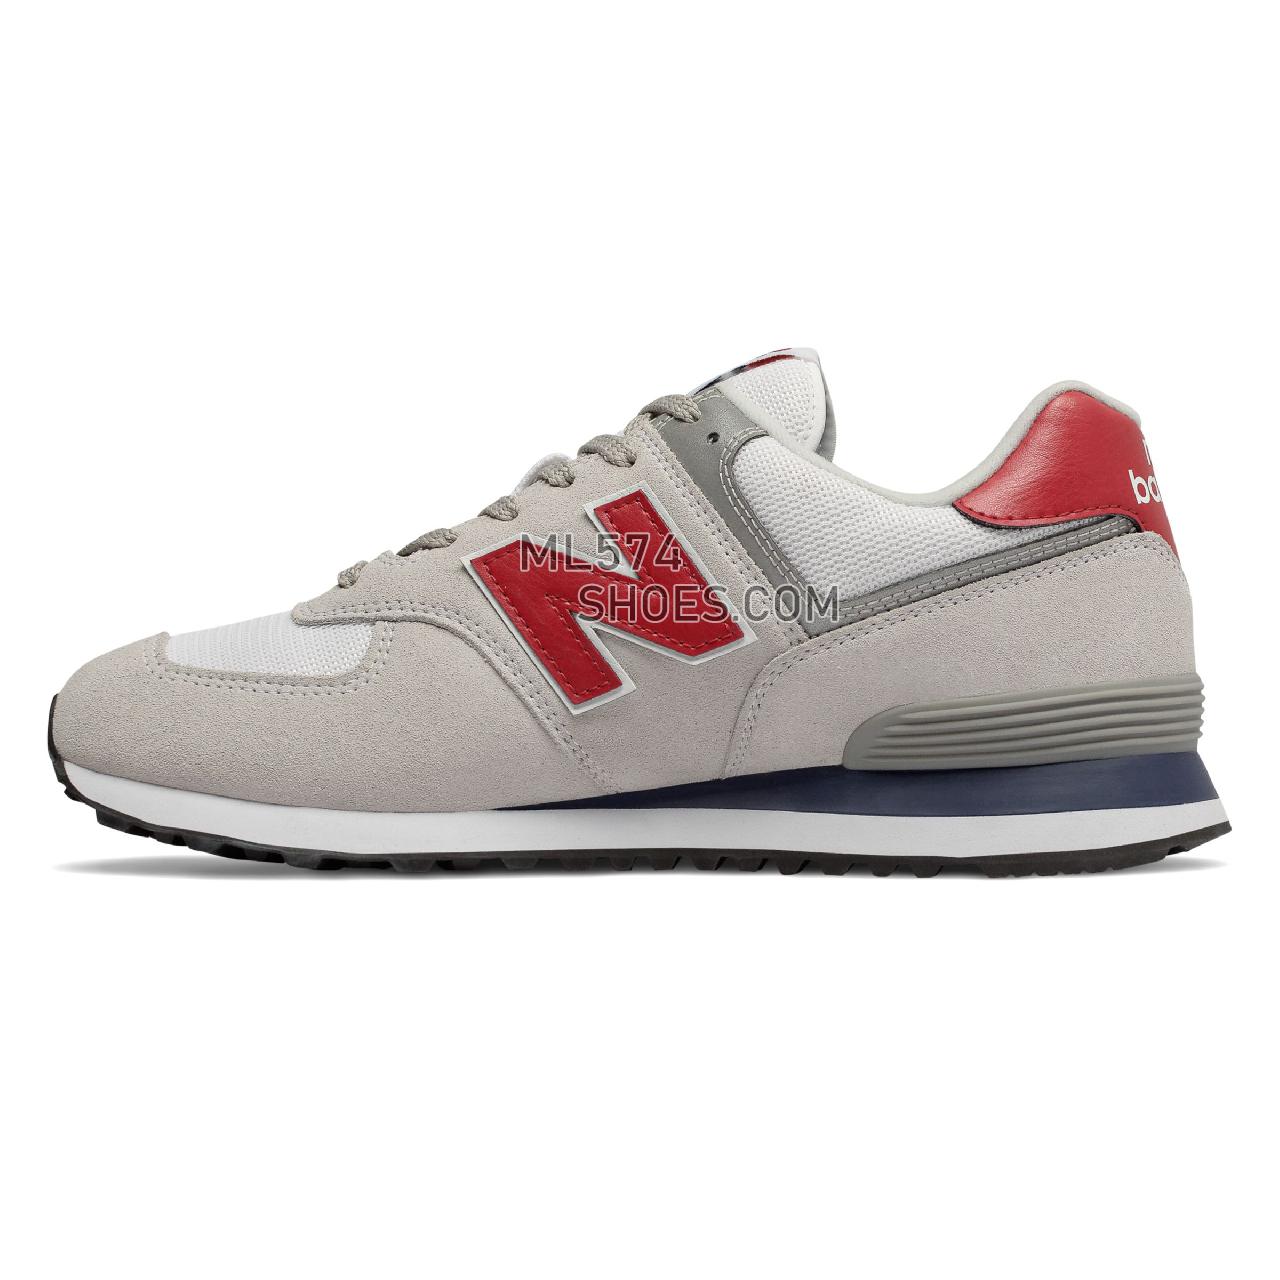 New Balance 574 - Men's 574 - Classic White with Red - ML574ATW